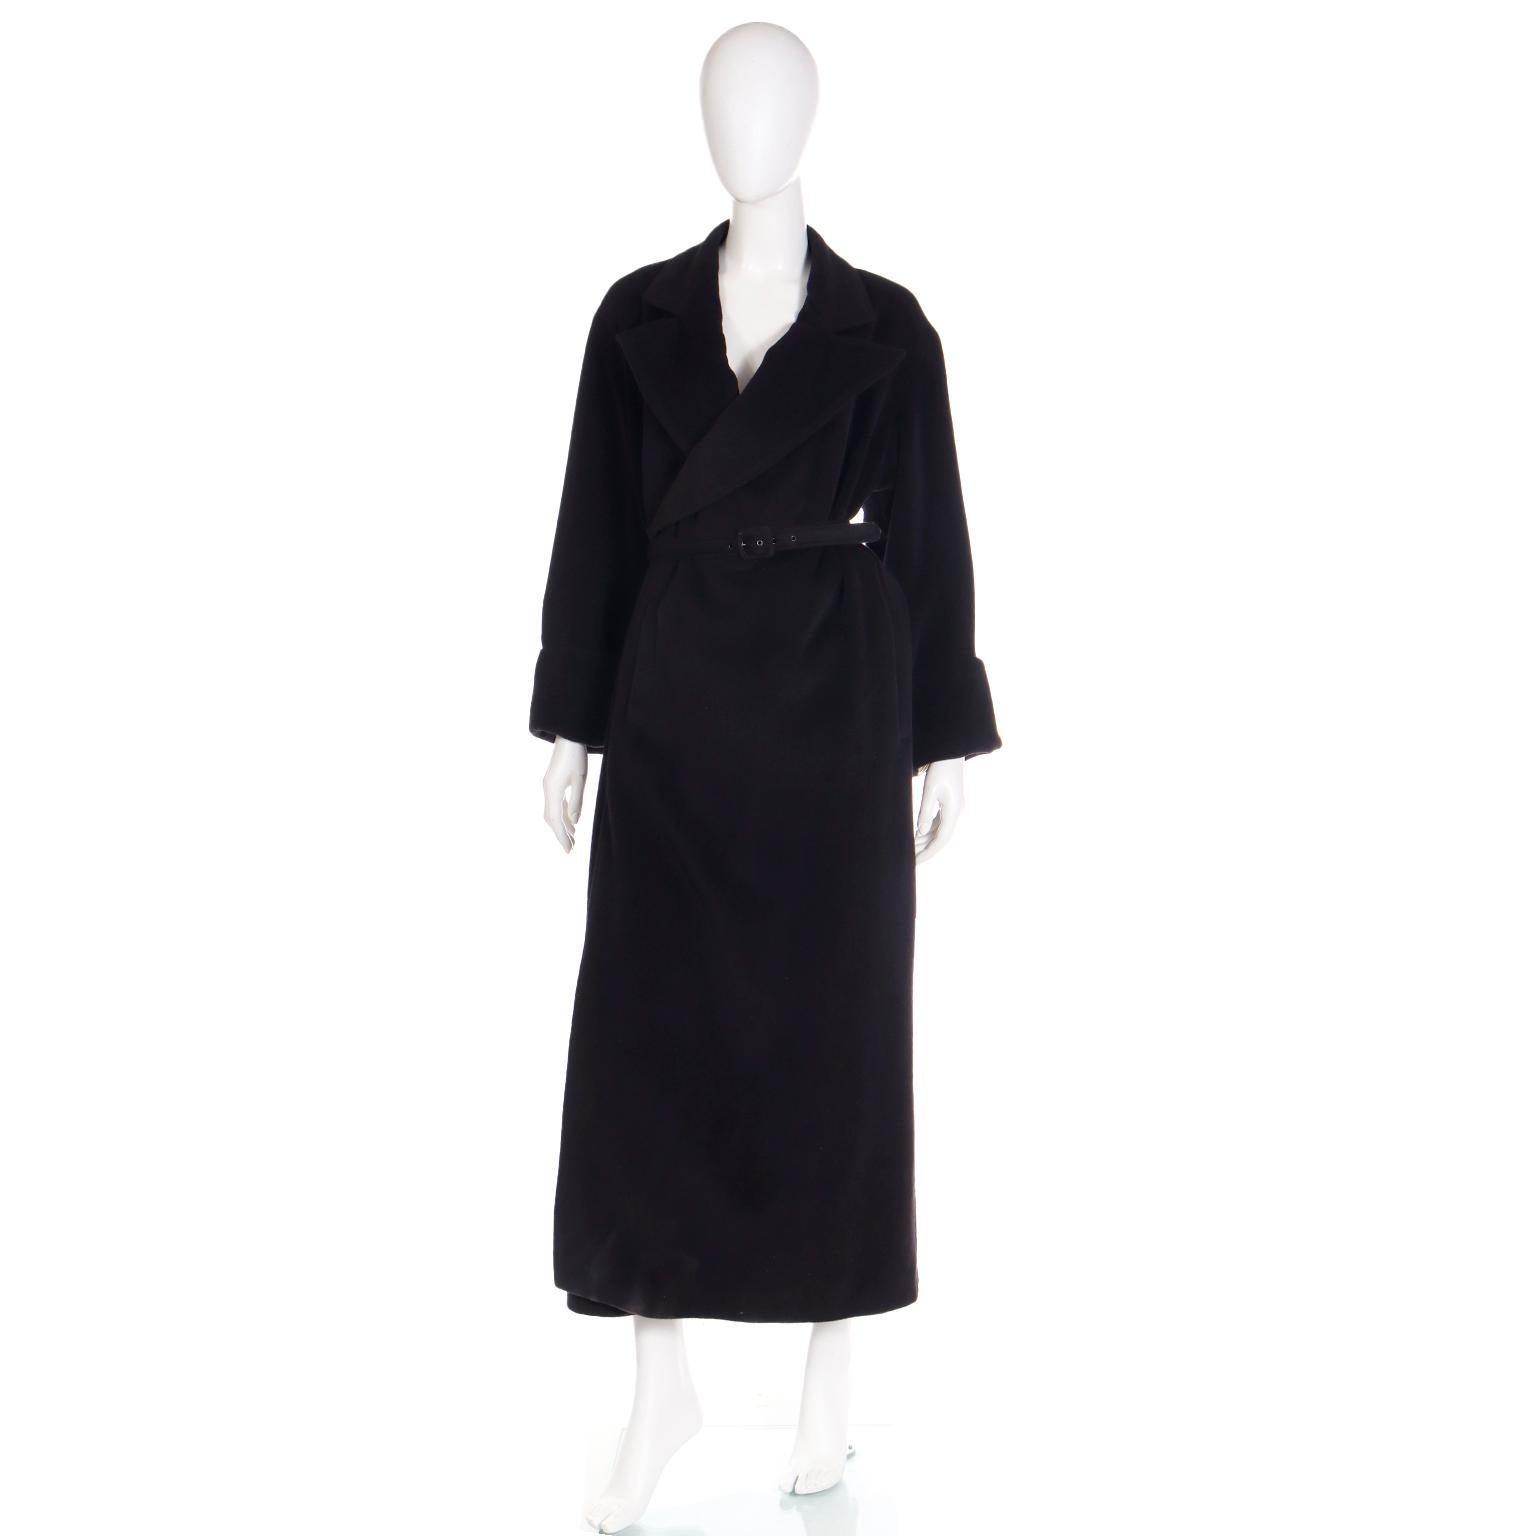 This vintage 2000 Jean Paul Gaultier Classique black wrap coat is such an easy piece to wear and incorporate into a modern wardrobe. This coat is effortless to wear and it comes with its original belt to add more structure and some closure. We